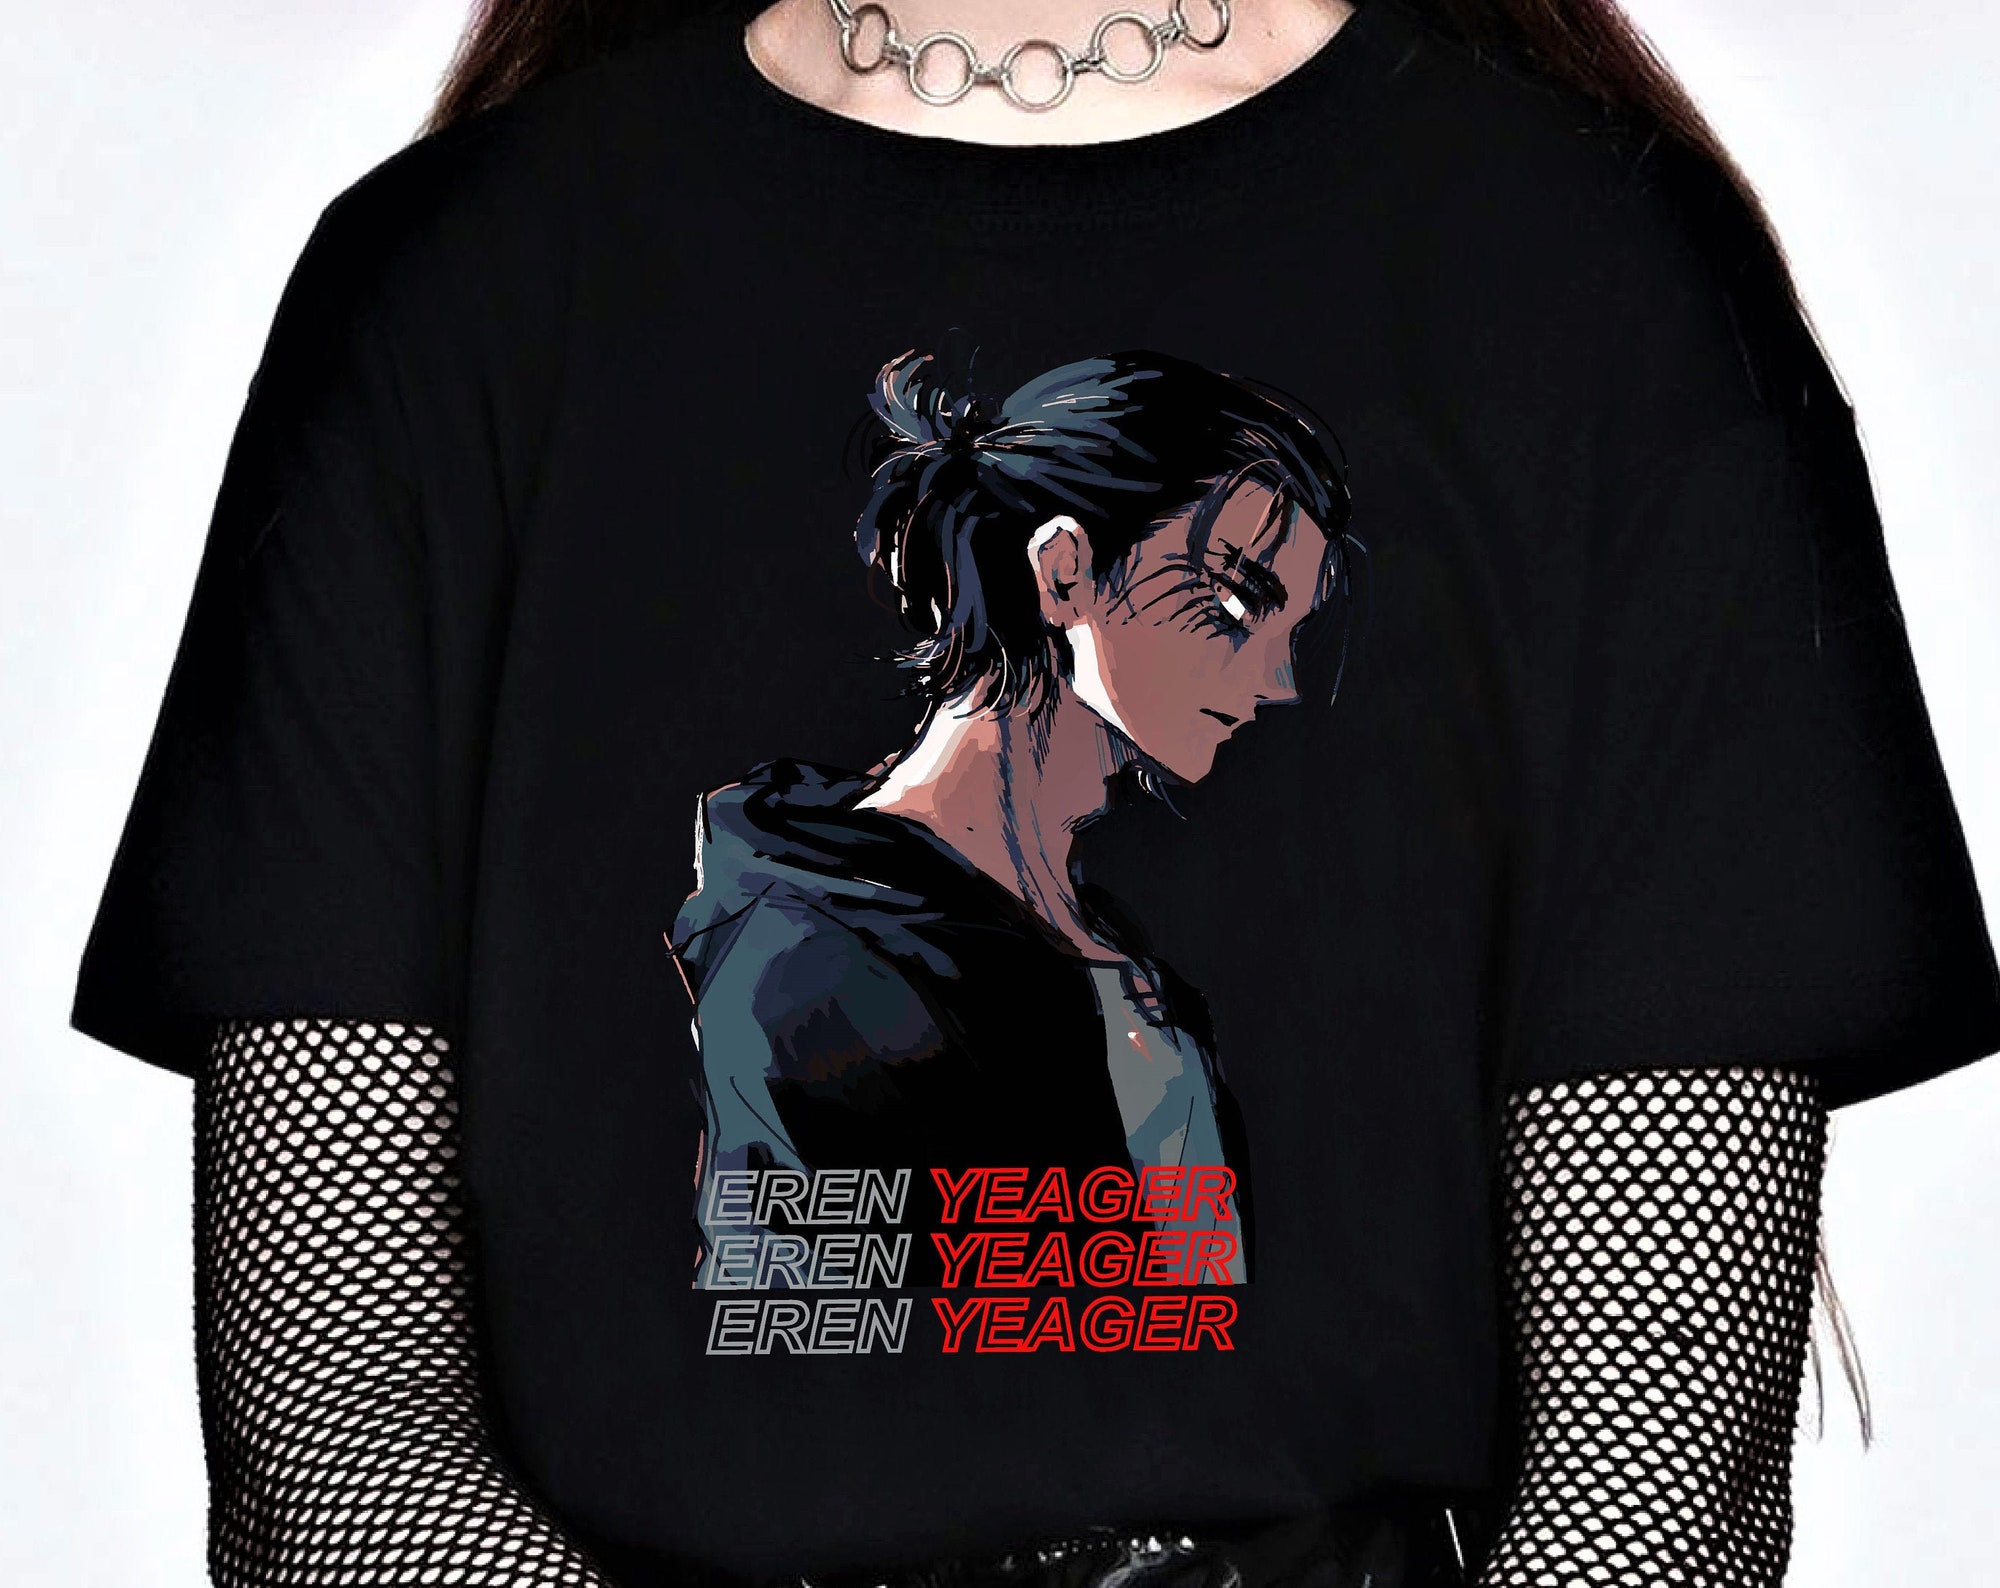 Discover Unisex, Eren Yeager Season 4 Attack on Titan Shirt-attack on titan tshirt,anime shirt,eren jaeger, eren yeager shirt, aot shirt